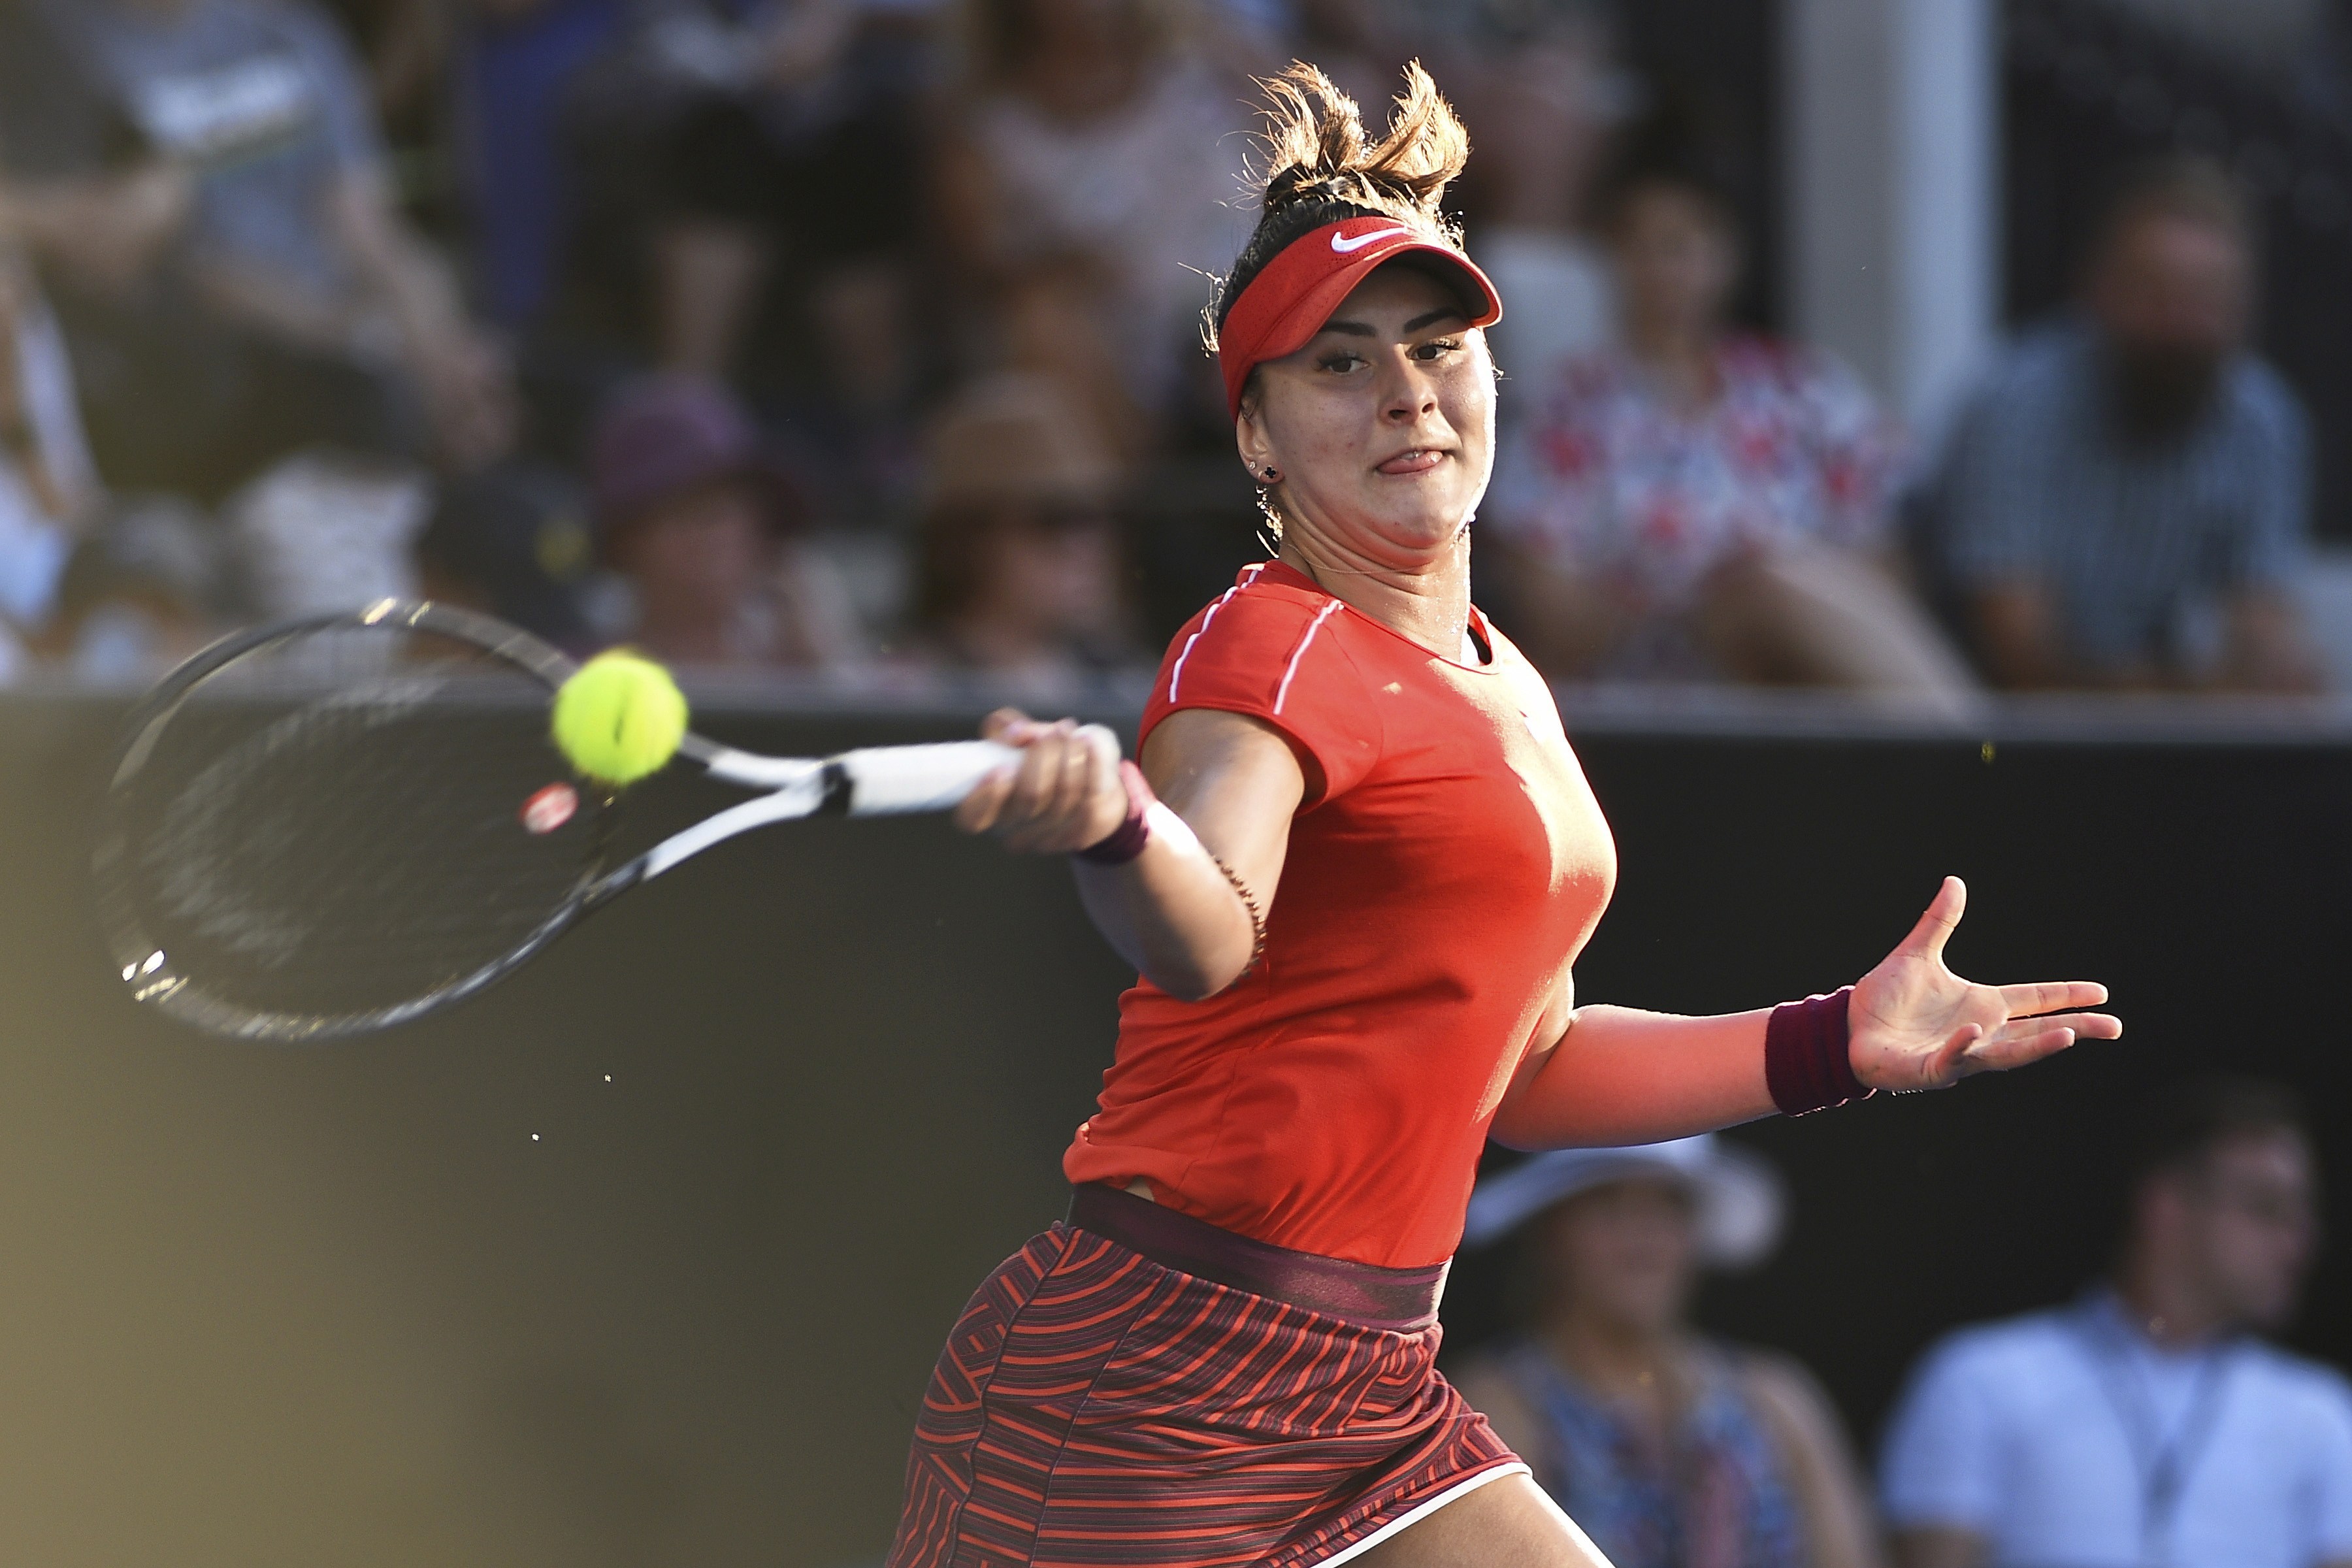 BIANCA ANDREESCU FOLLOWS UP WIN OVER WOZNIACKI WITH ANOTHER OVER